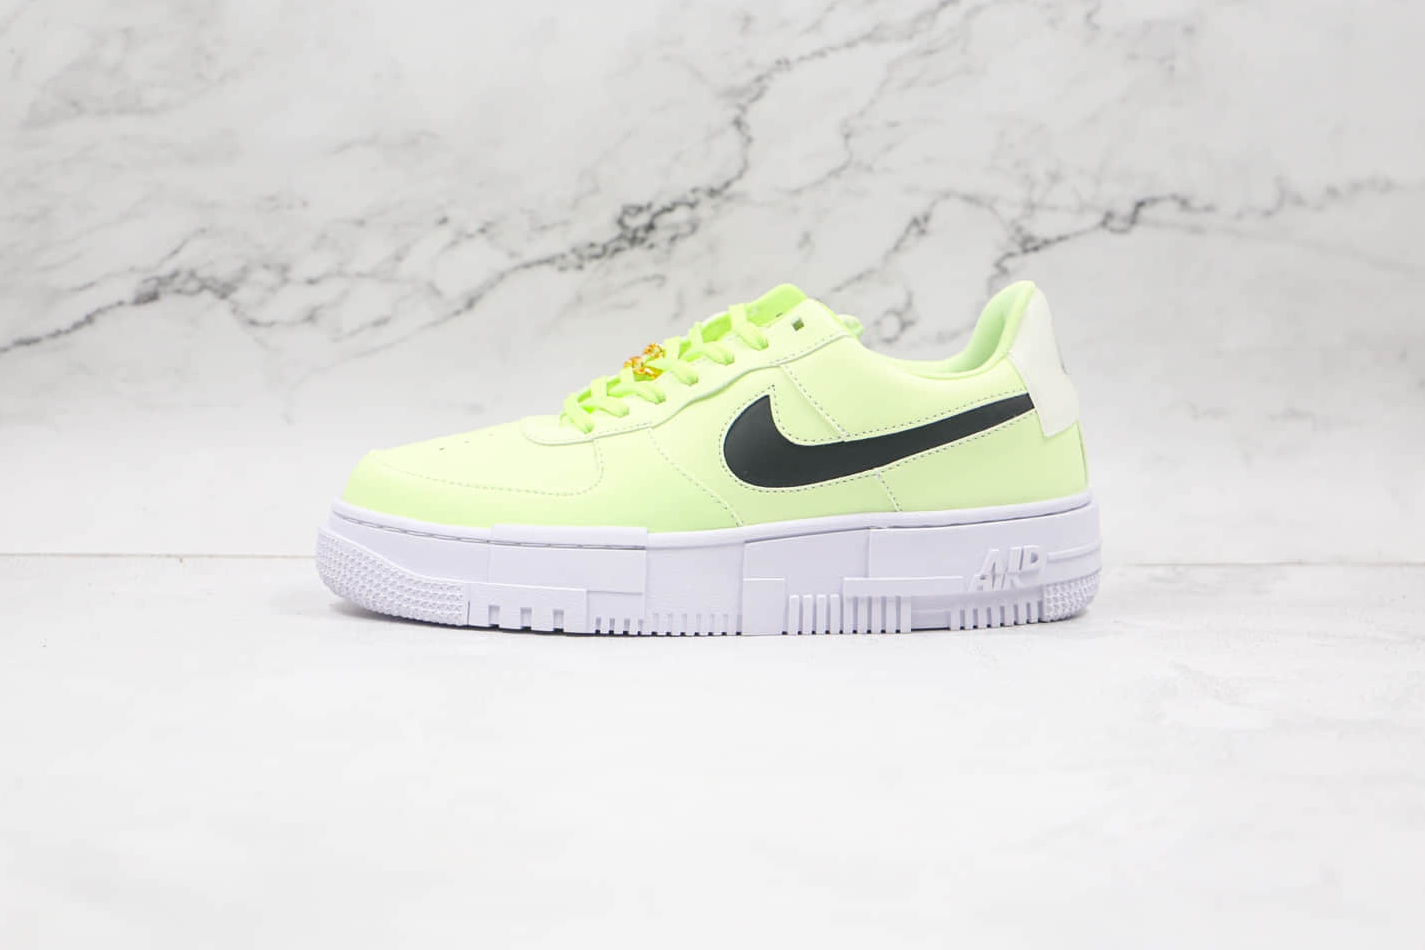 Nike Air Force 1 '07 LX 'Barely Volt' CT3228-701 - Limited Edition Women's Sneakers